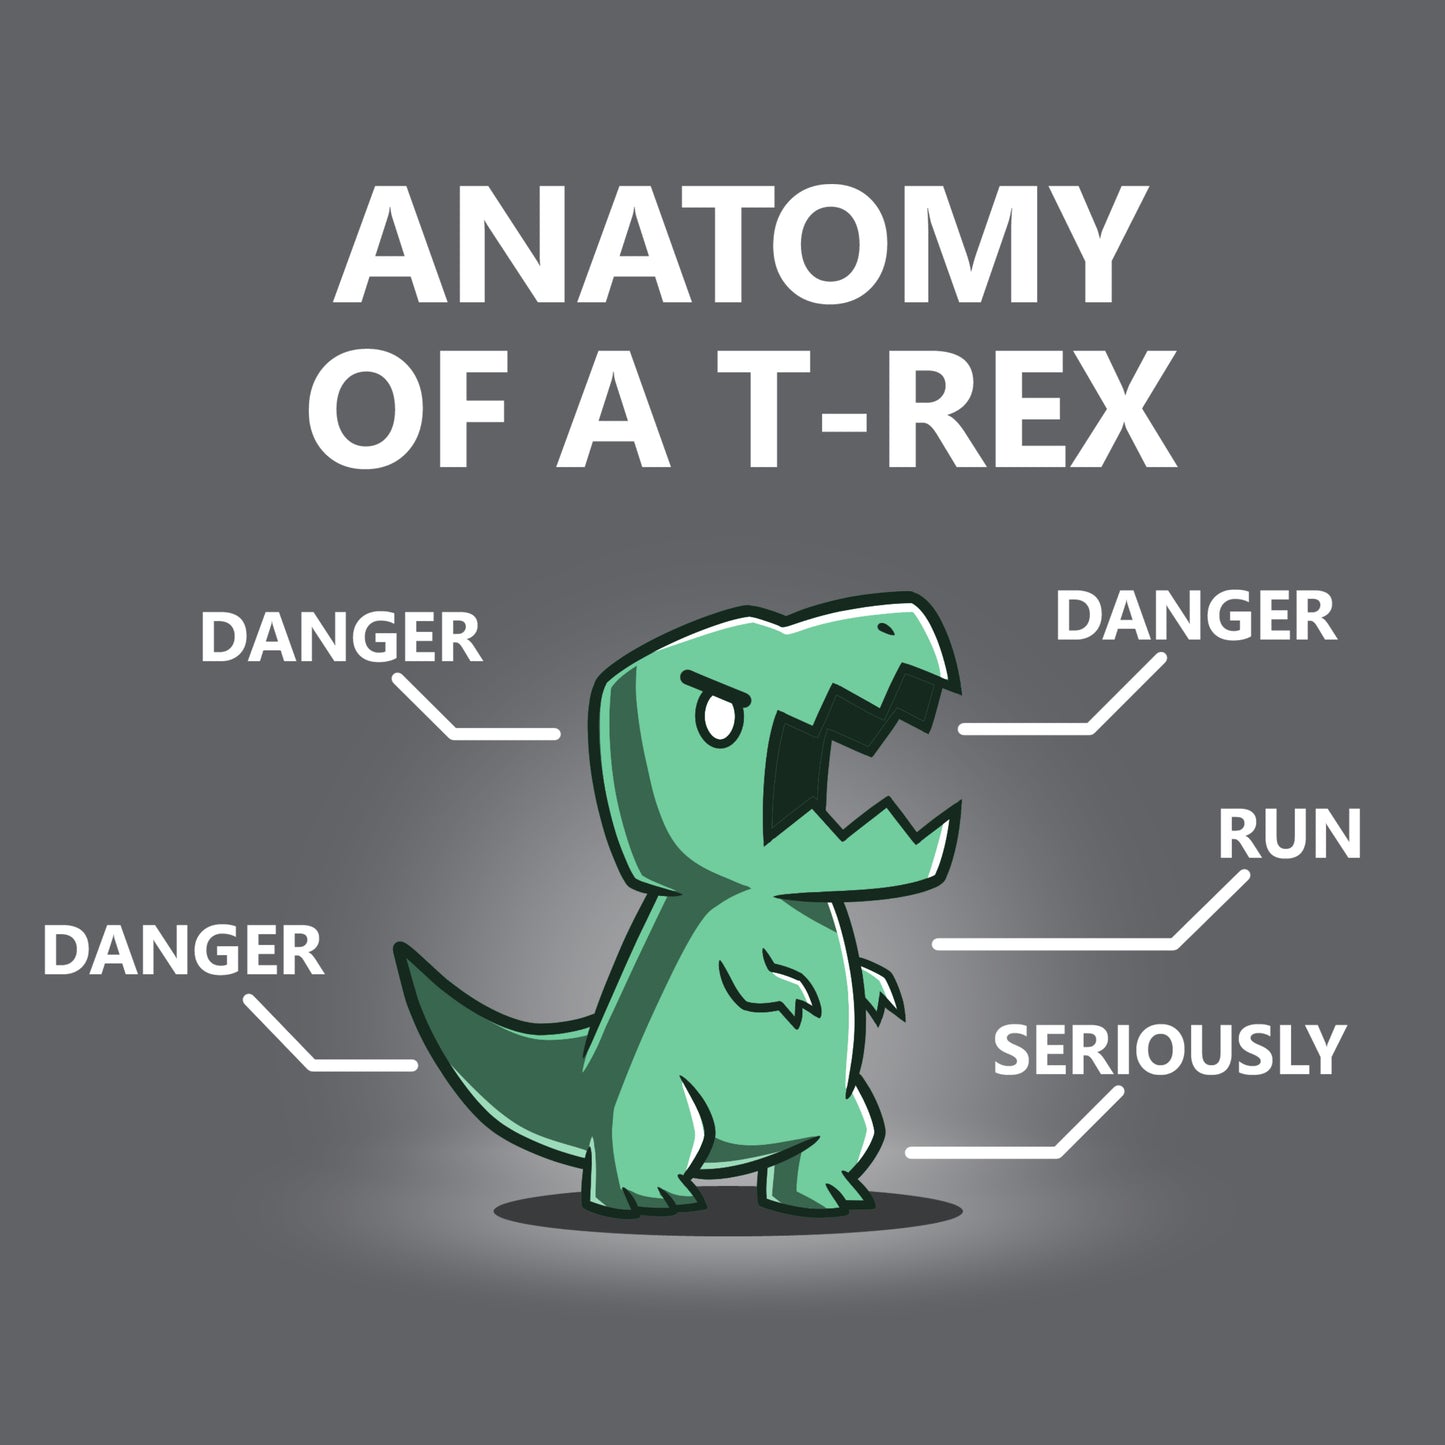 Anatomy of a TeeTurtle T-Rex product can be replaced with "Anatomy of a T-Rex" brand by TeeTurtle.